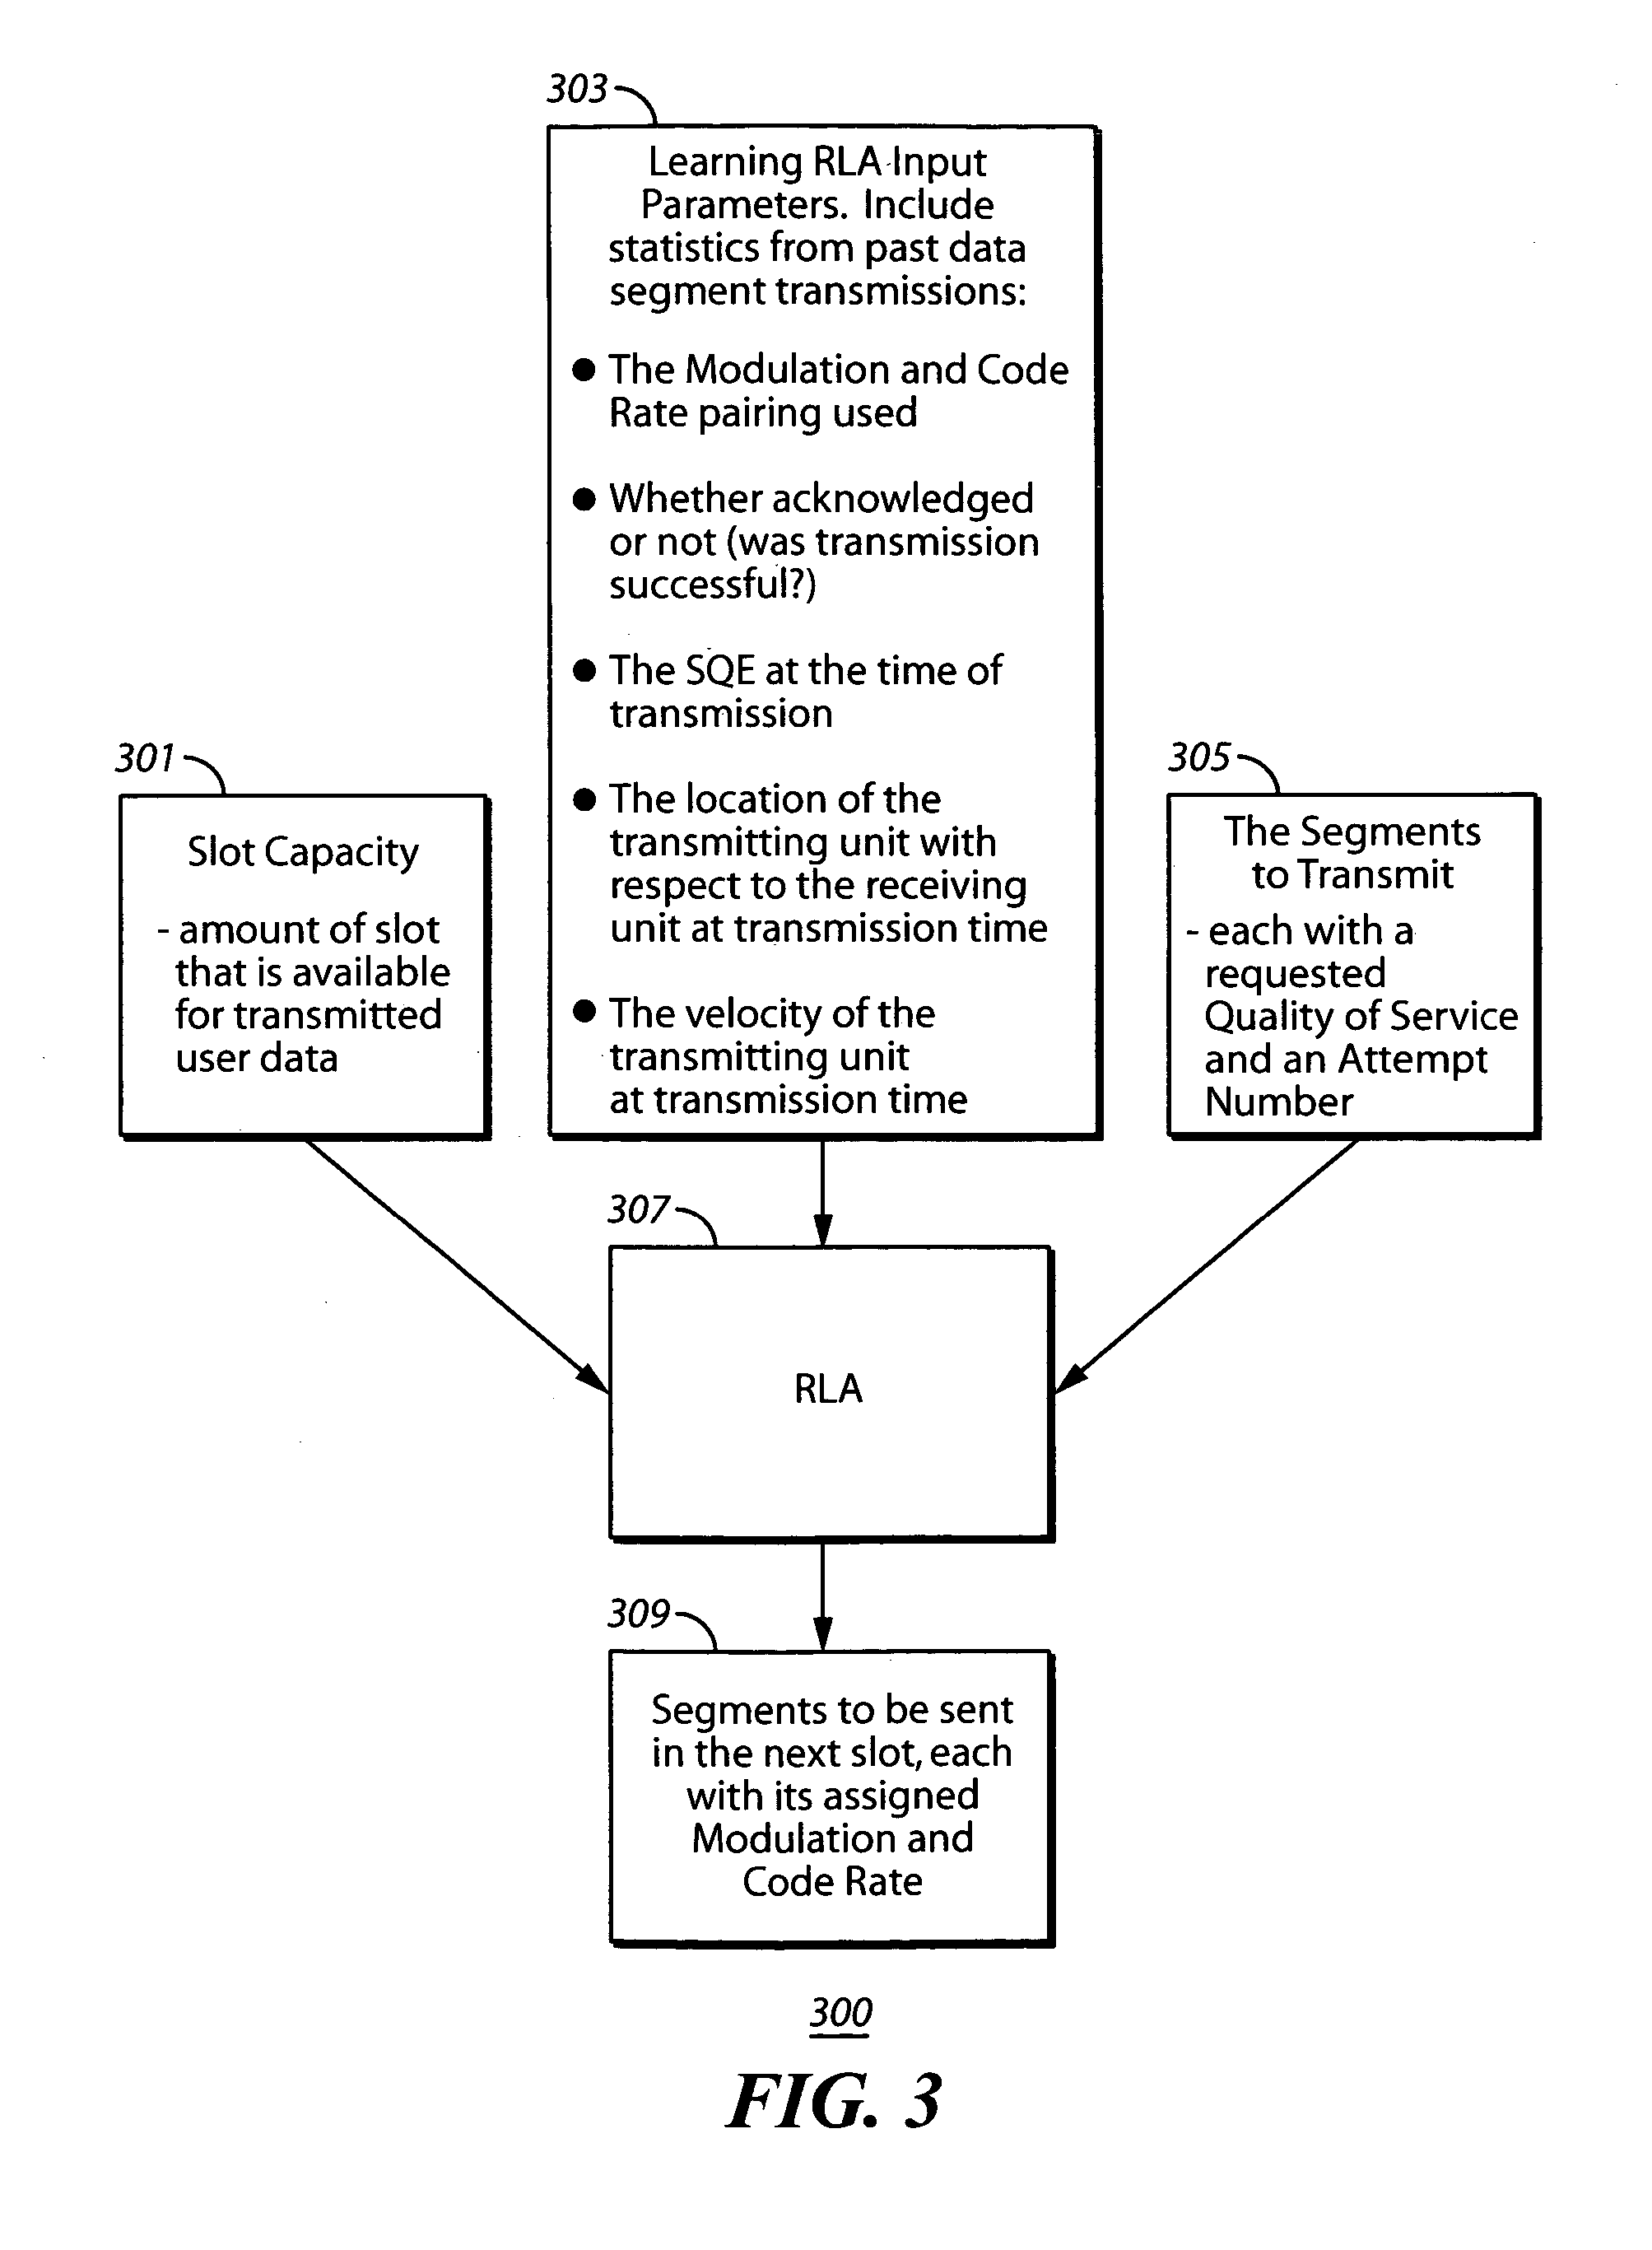 Method for the selection of forward error correction (FEC)/ constellation pairings for digital transmitted segments based on learning radio link adaptation (RLA)